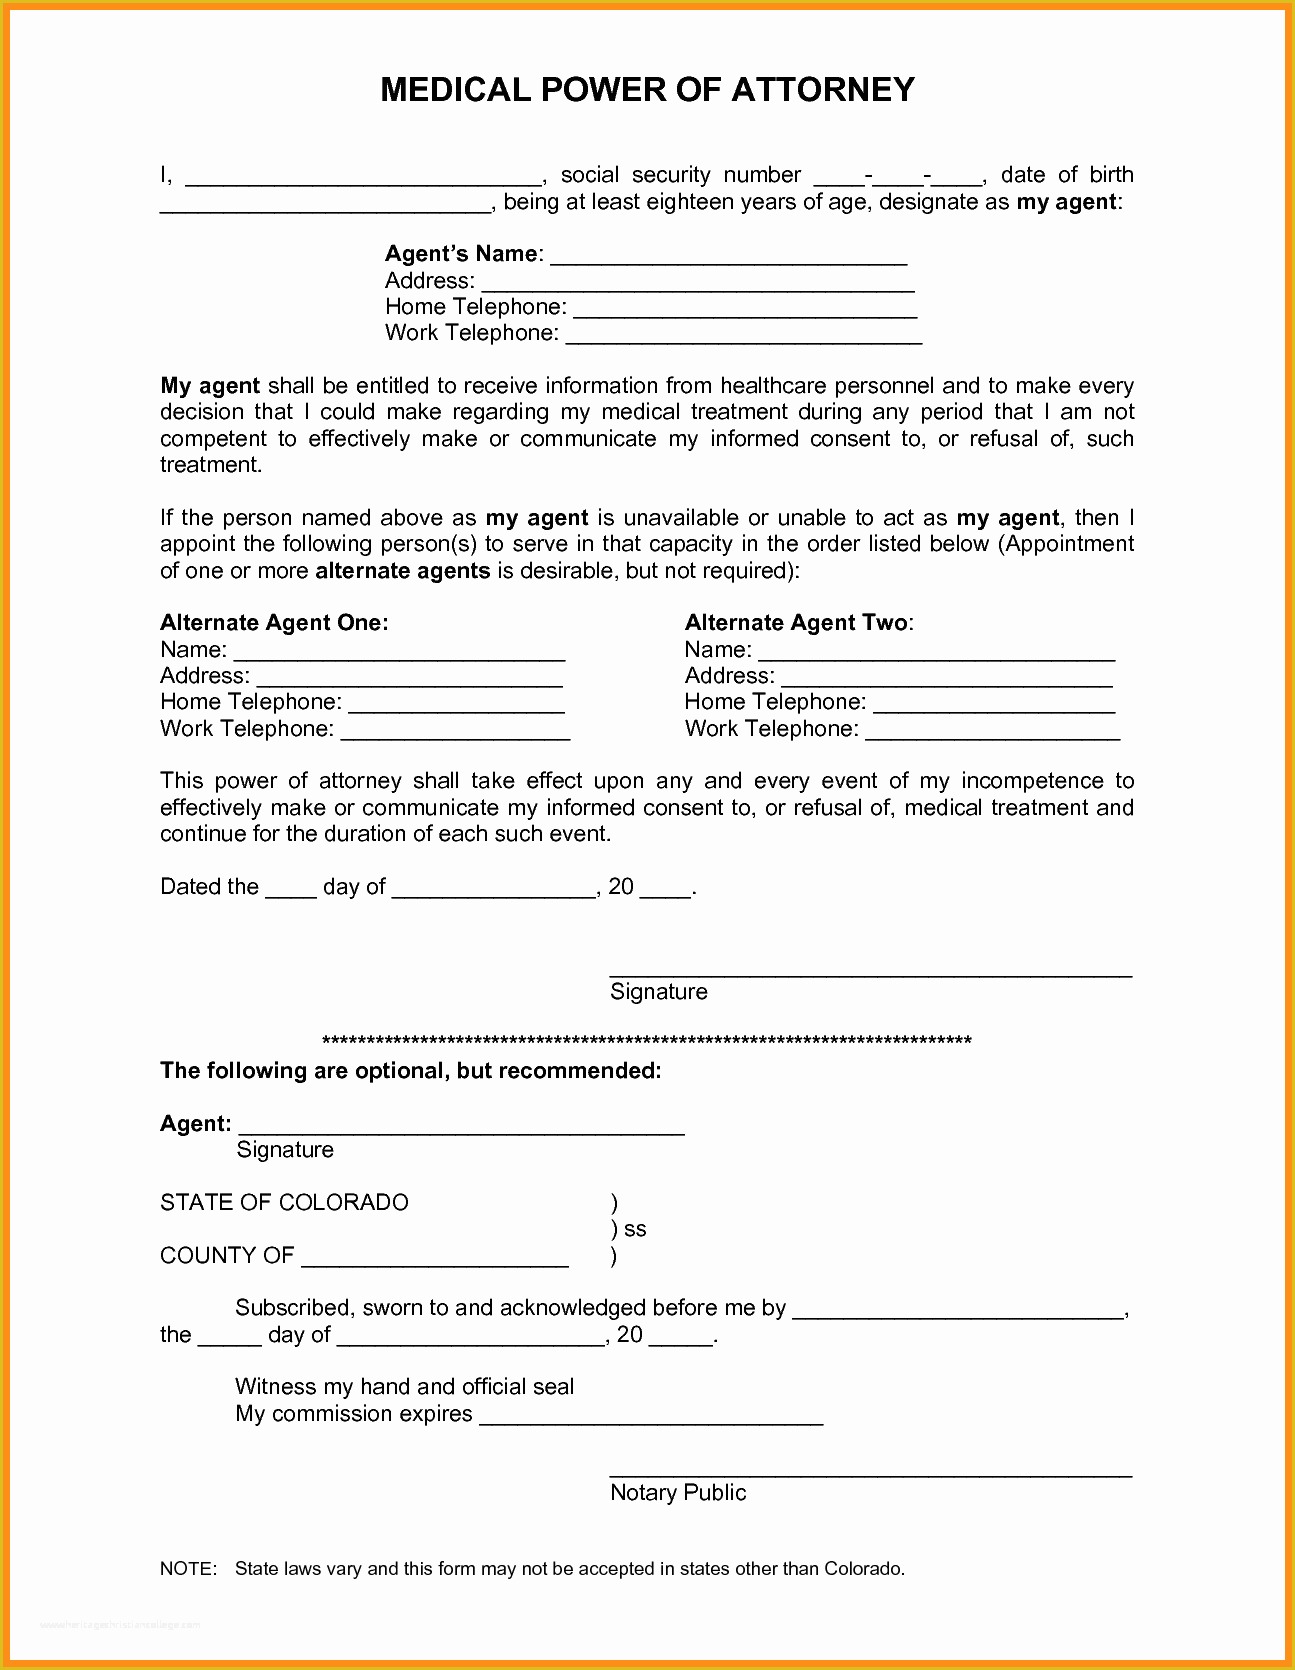 Free Poa Template Of attorney Medical Power attorney form Medical Power